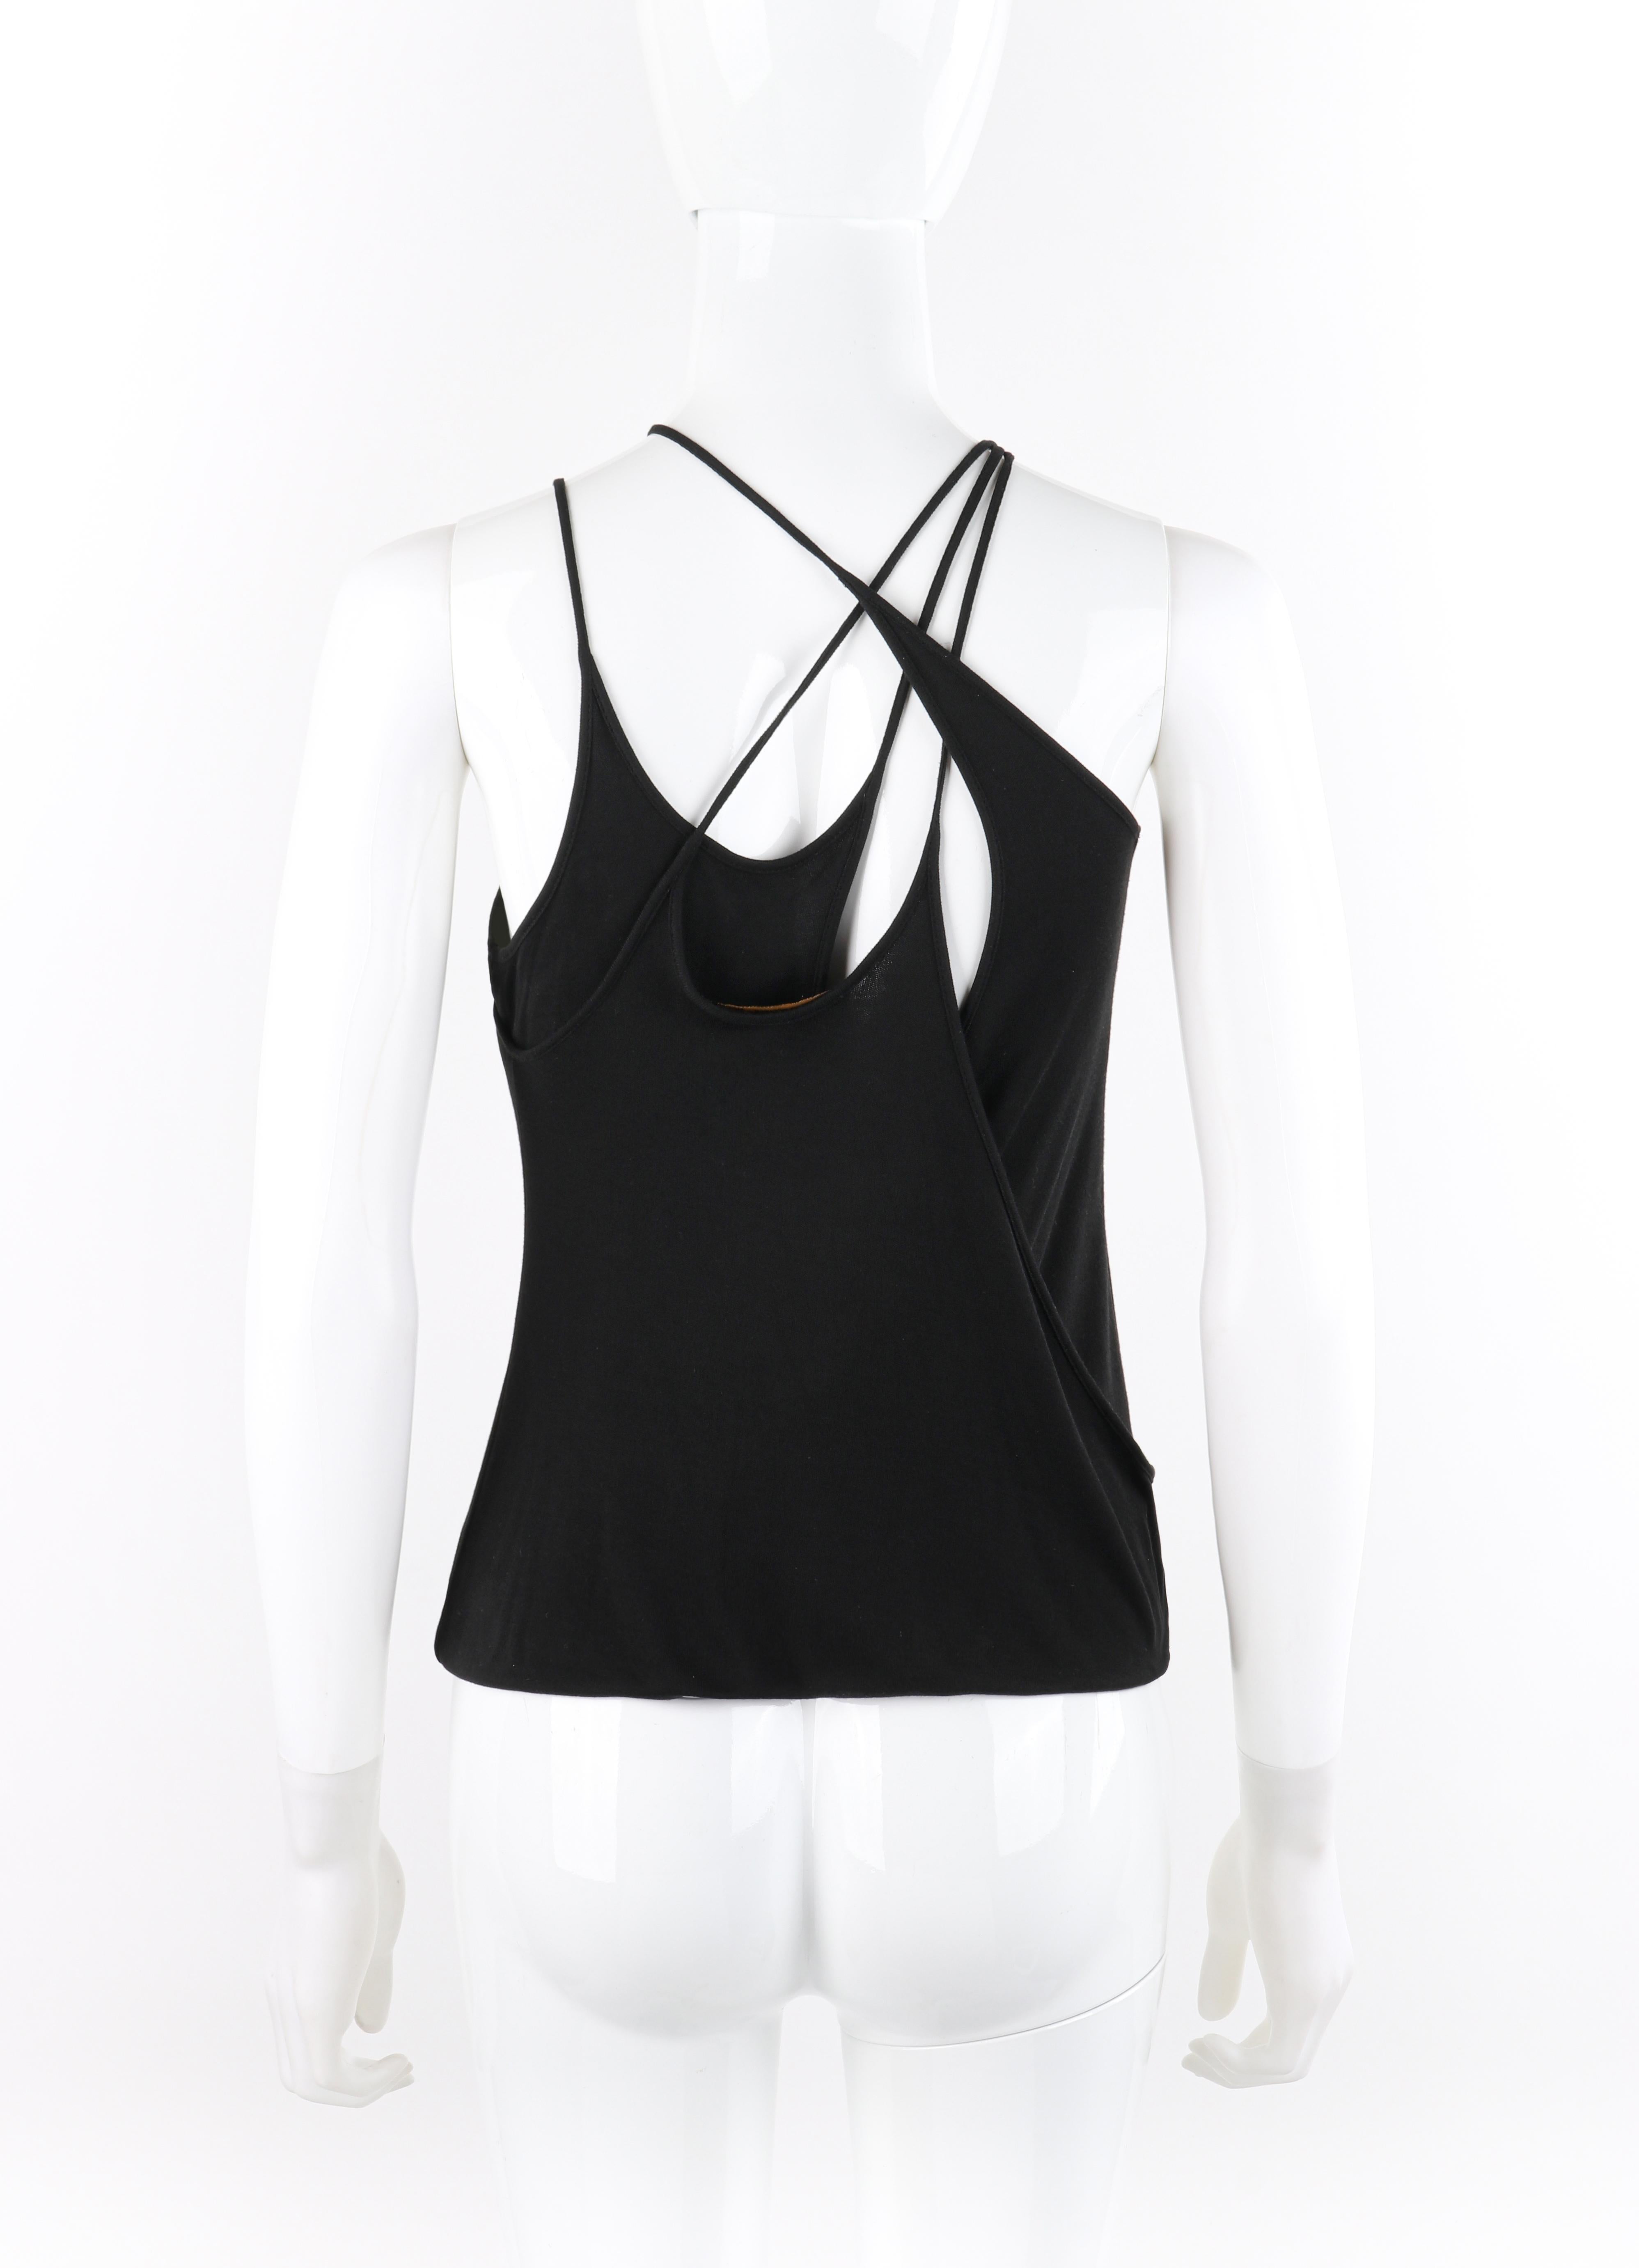 ALEXANDER McQUEEN S/S 2002 Black Multiway Five Strap Crisscross Knit Tank Top  In Good Condition For Sale In Thiensville, WI